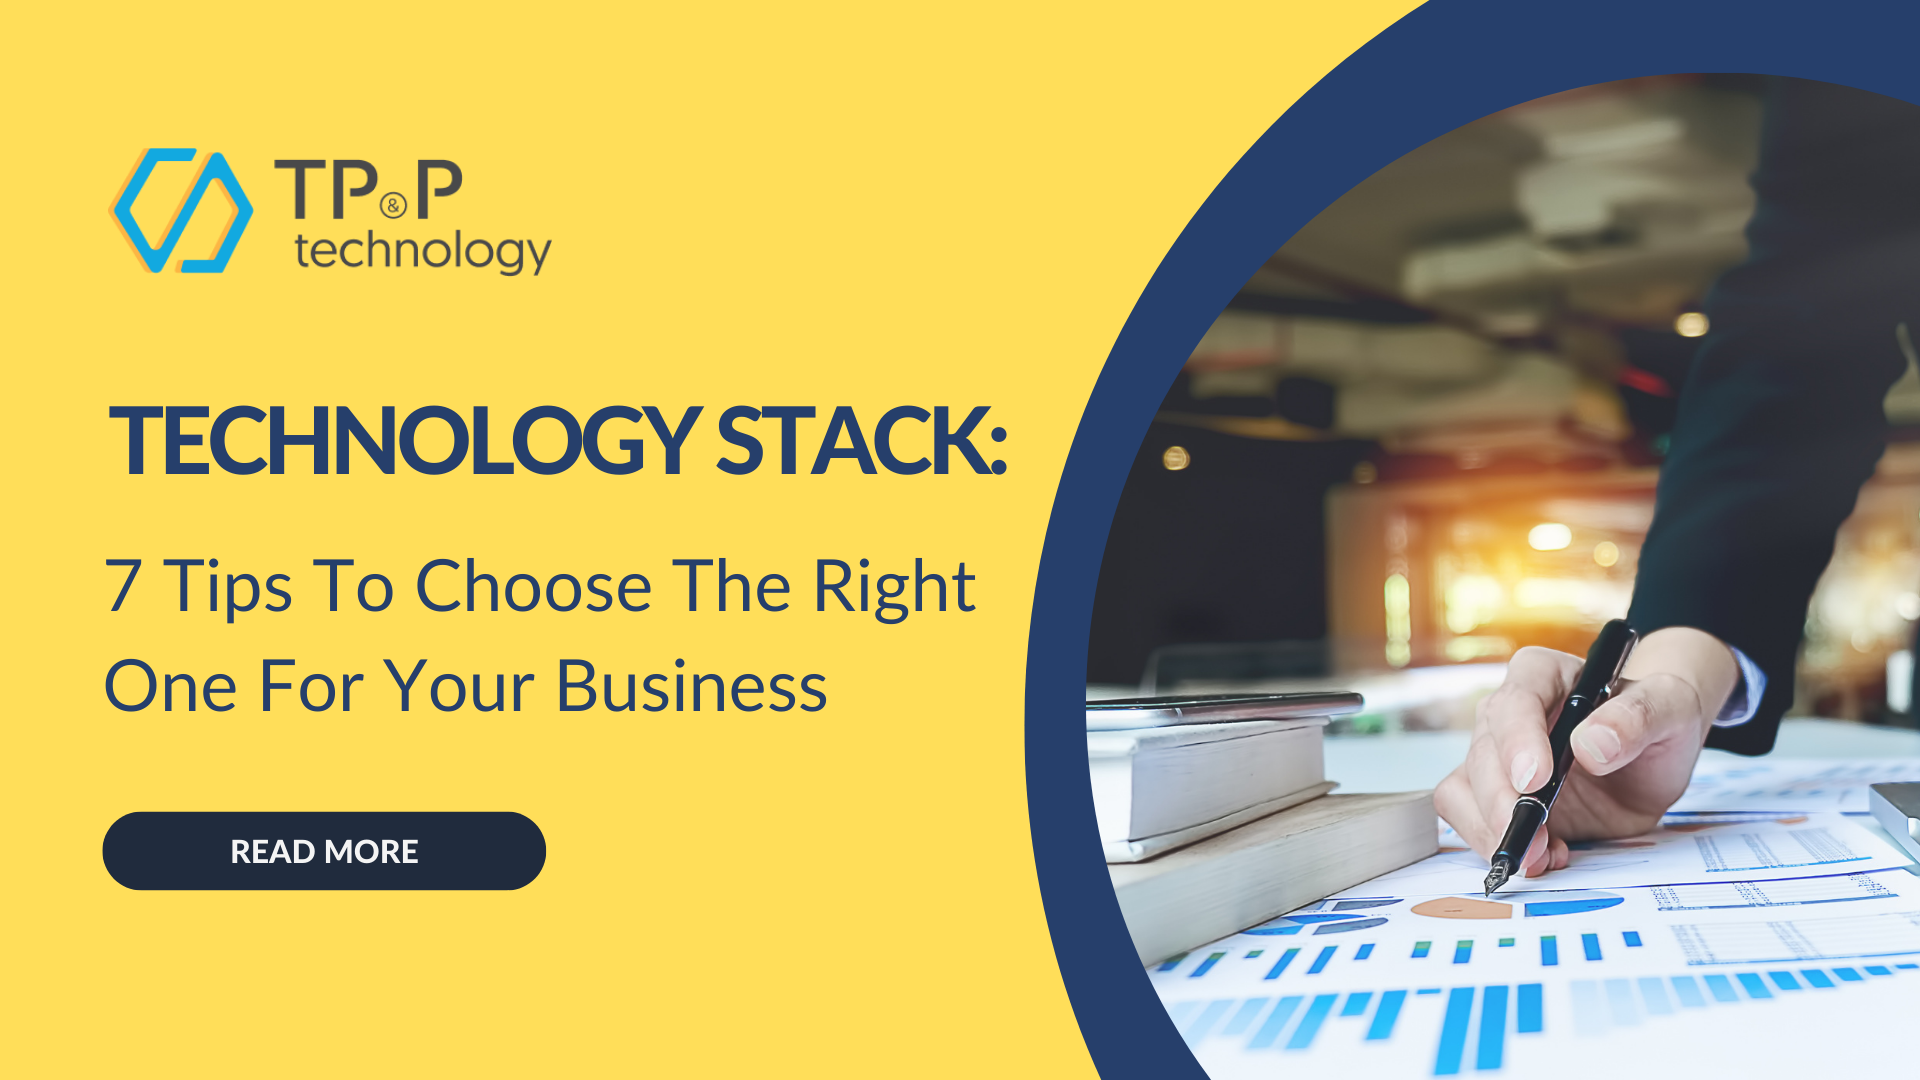 Technology Stack: 7 Tips To Choose The Right One For Your Business